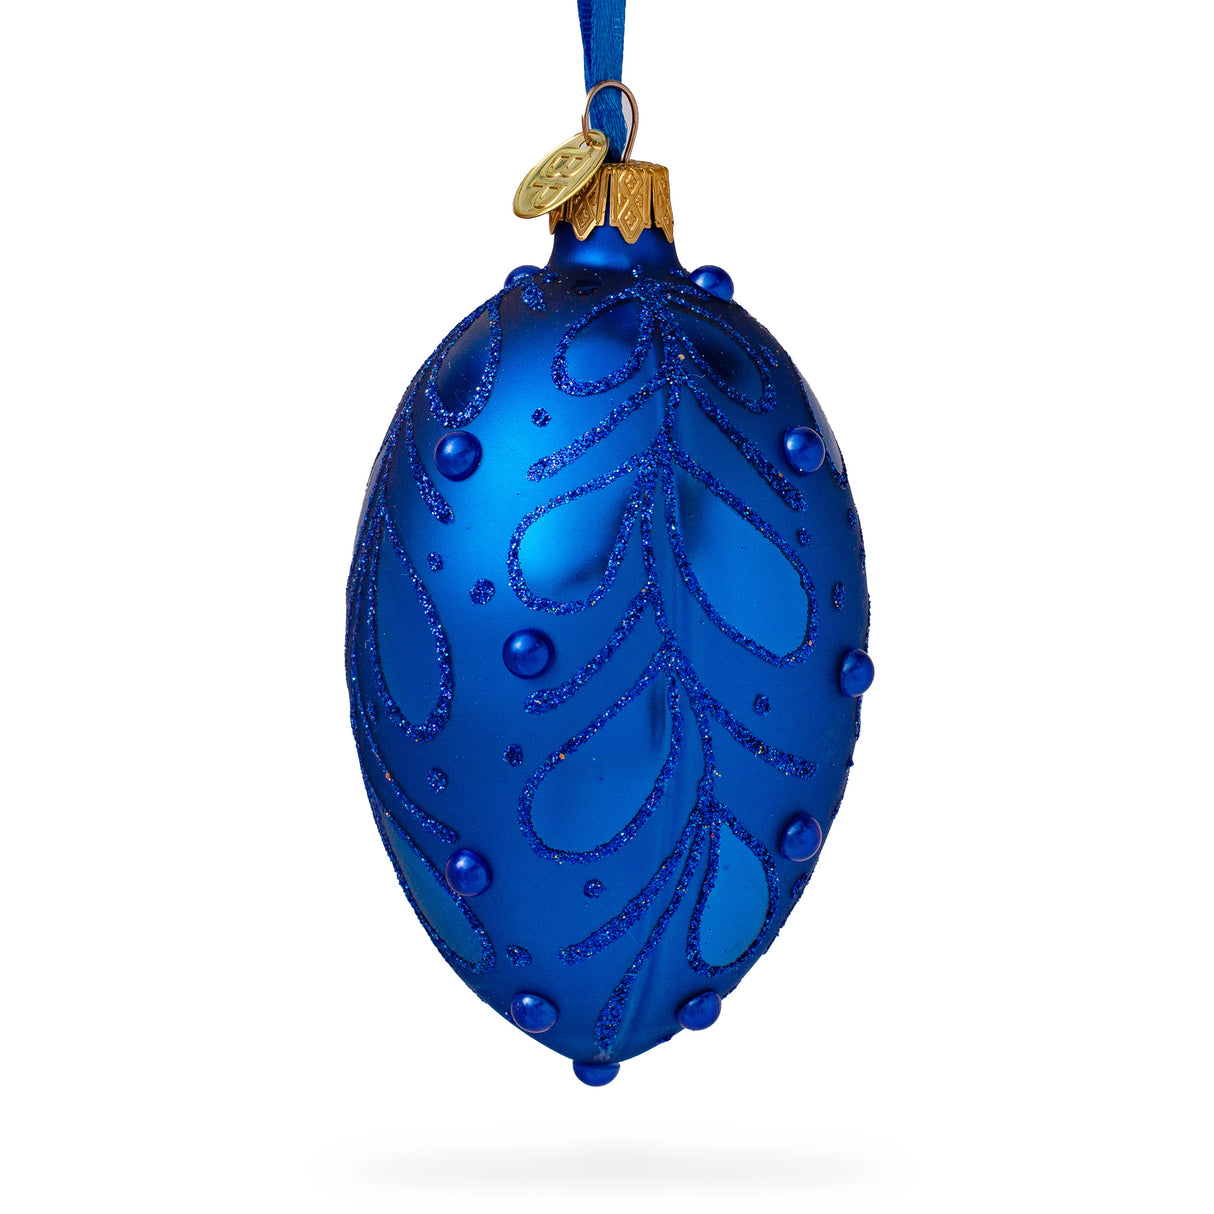 Bejeweled Scroll on Blue Glass Egg Christmas Ornament 4 Inches in Blue color, Oval shape